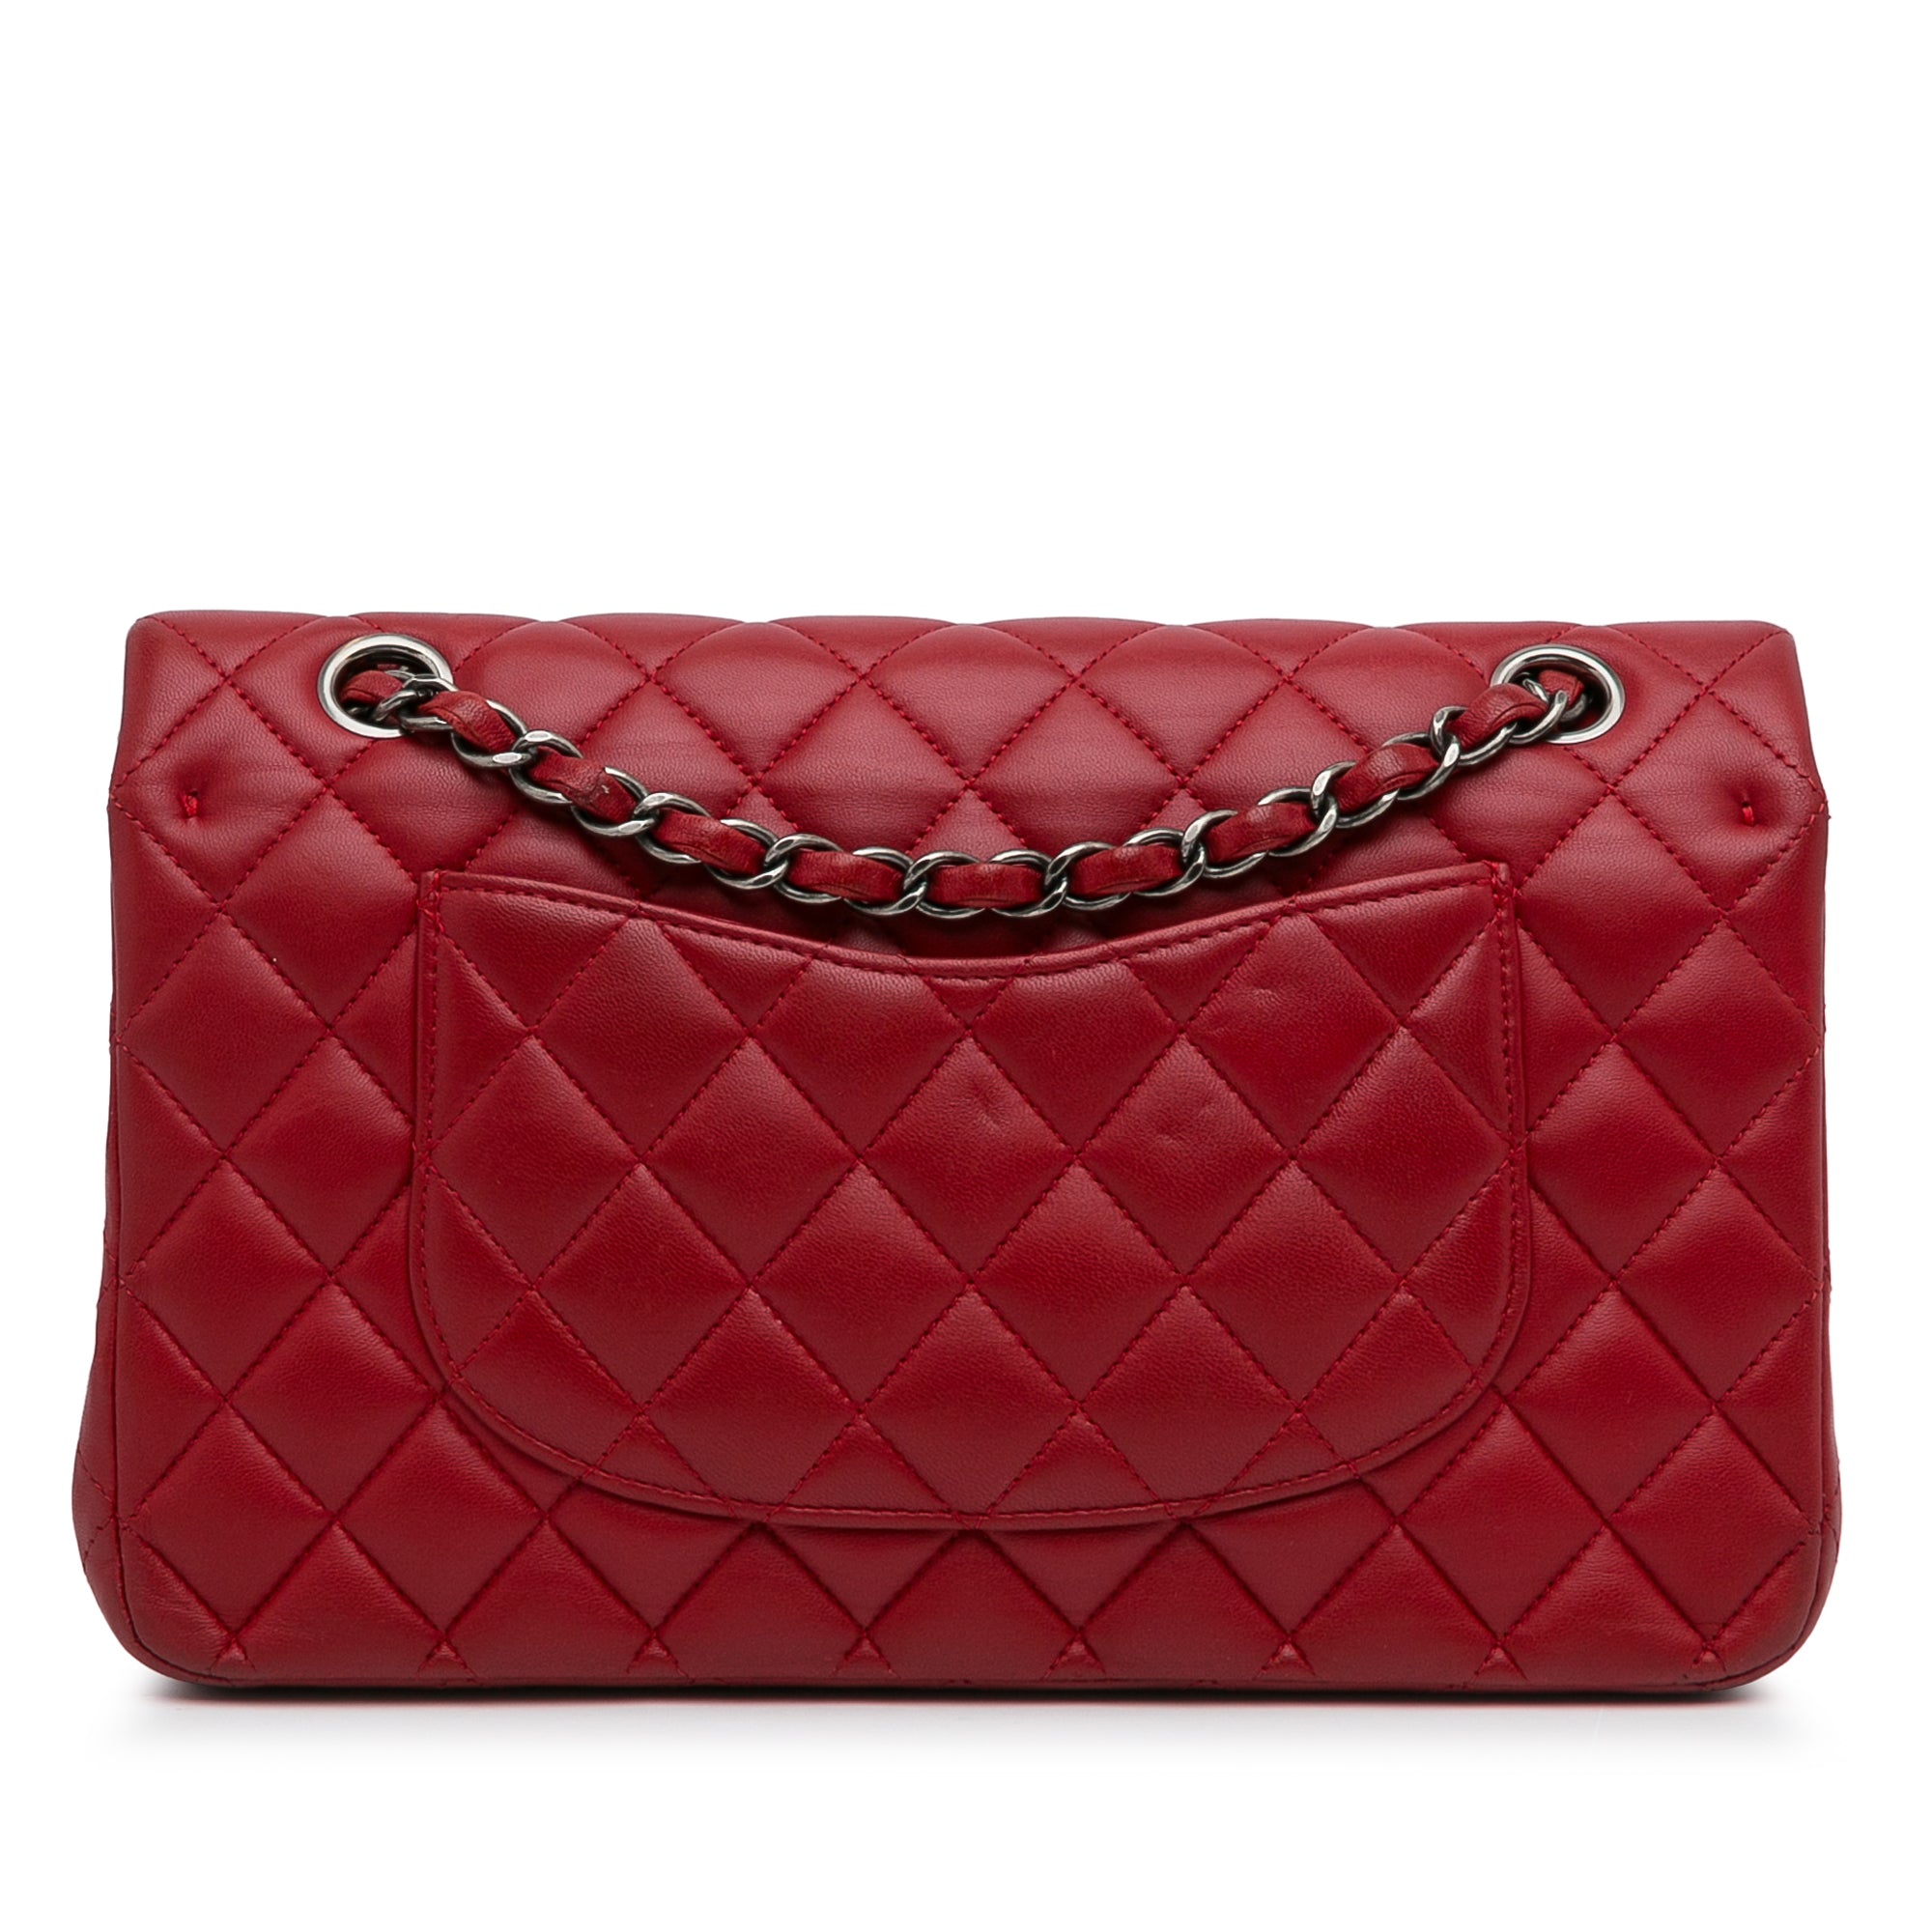 Chanel Classic Double Flap Medium Leather Shoulder Bag Red